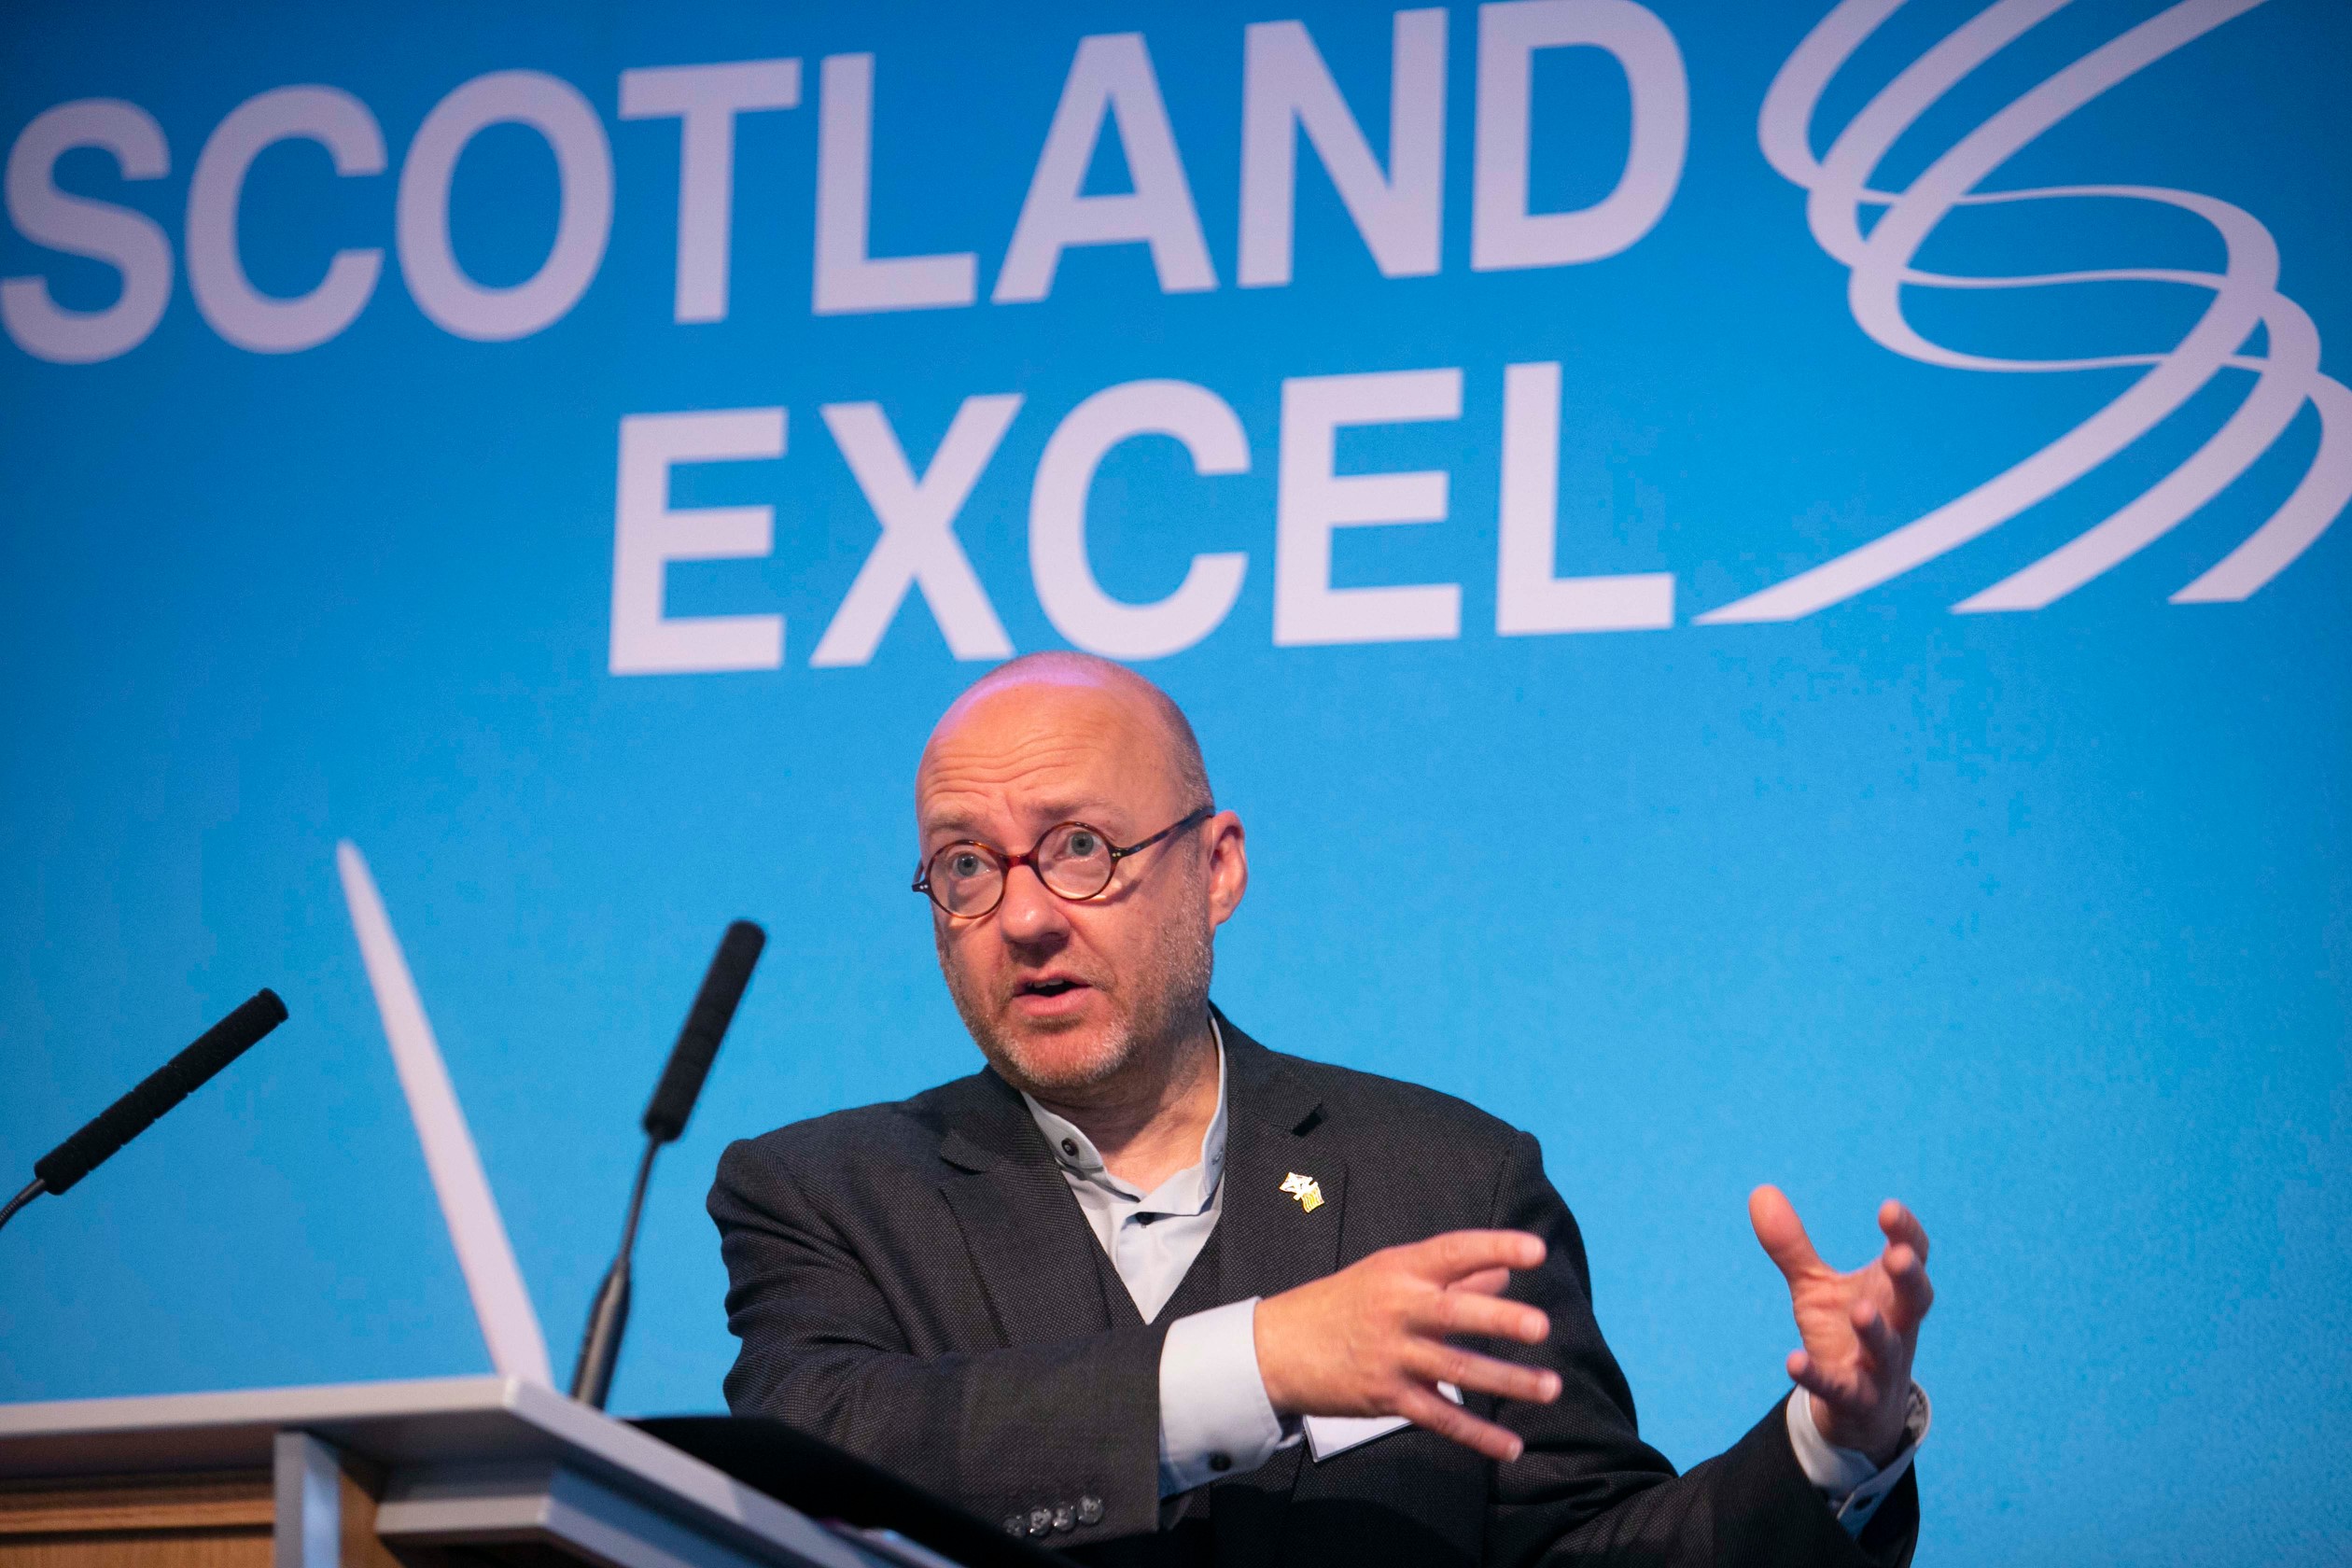 Patrick Harvie opens Scotland Excel’s Energy Efficiency Conference and Expo